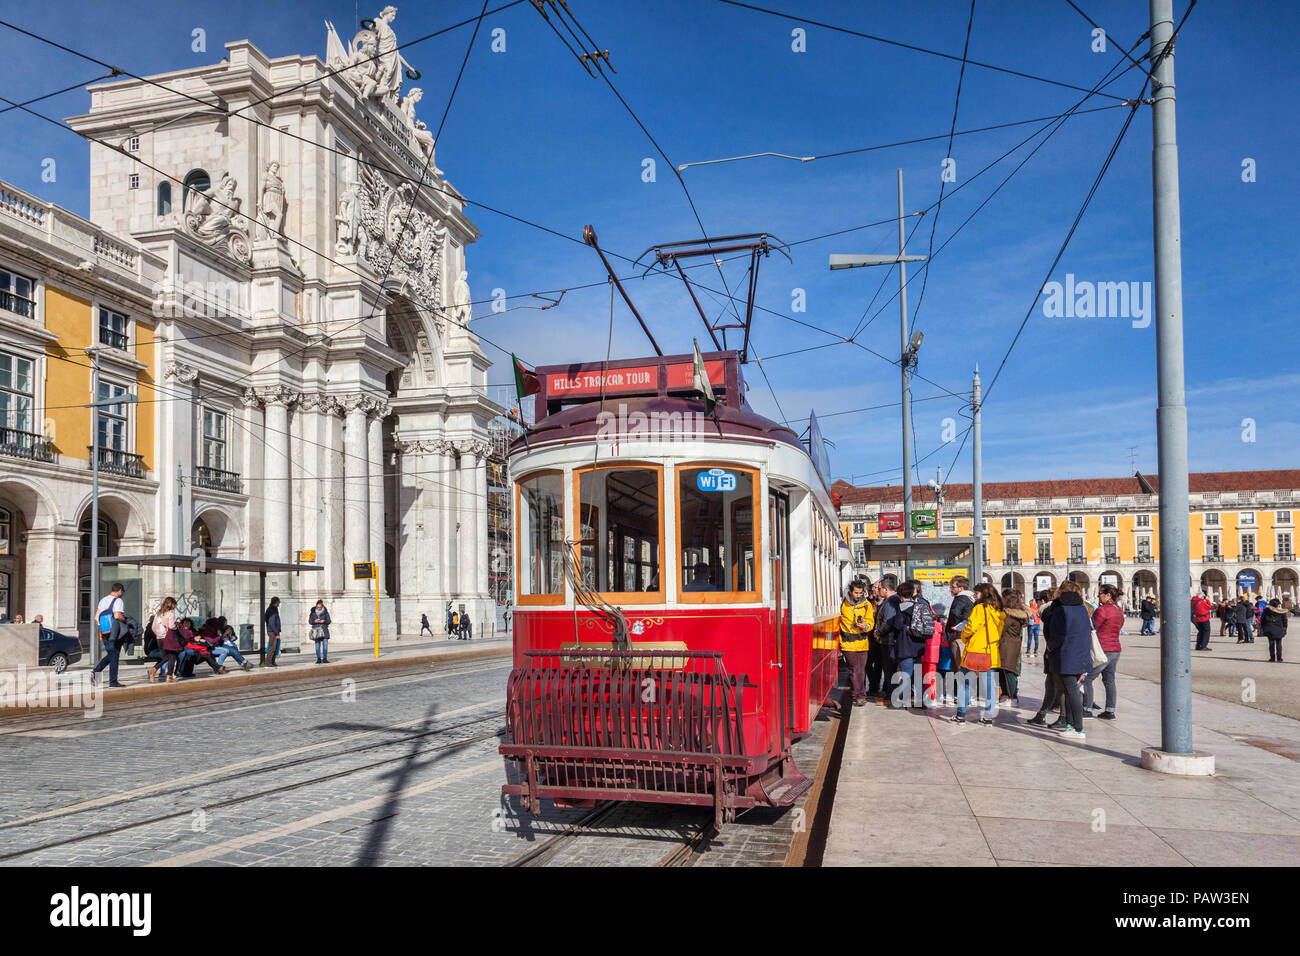 28 February 2018: Lisbon, Portugal - A queue of people getting onto a red tram in Praca de Comercio, or Terreiro de Paco, on a bright sunny day, the l Stock Photo